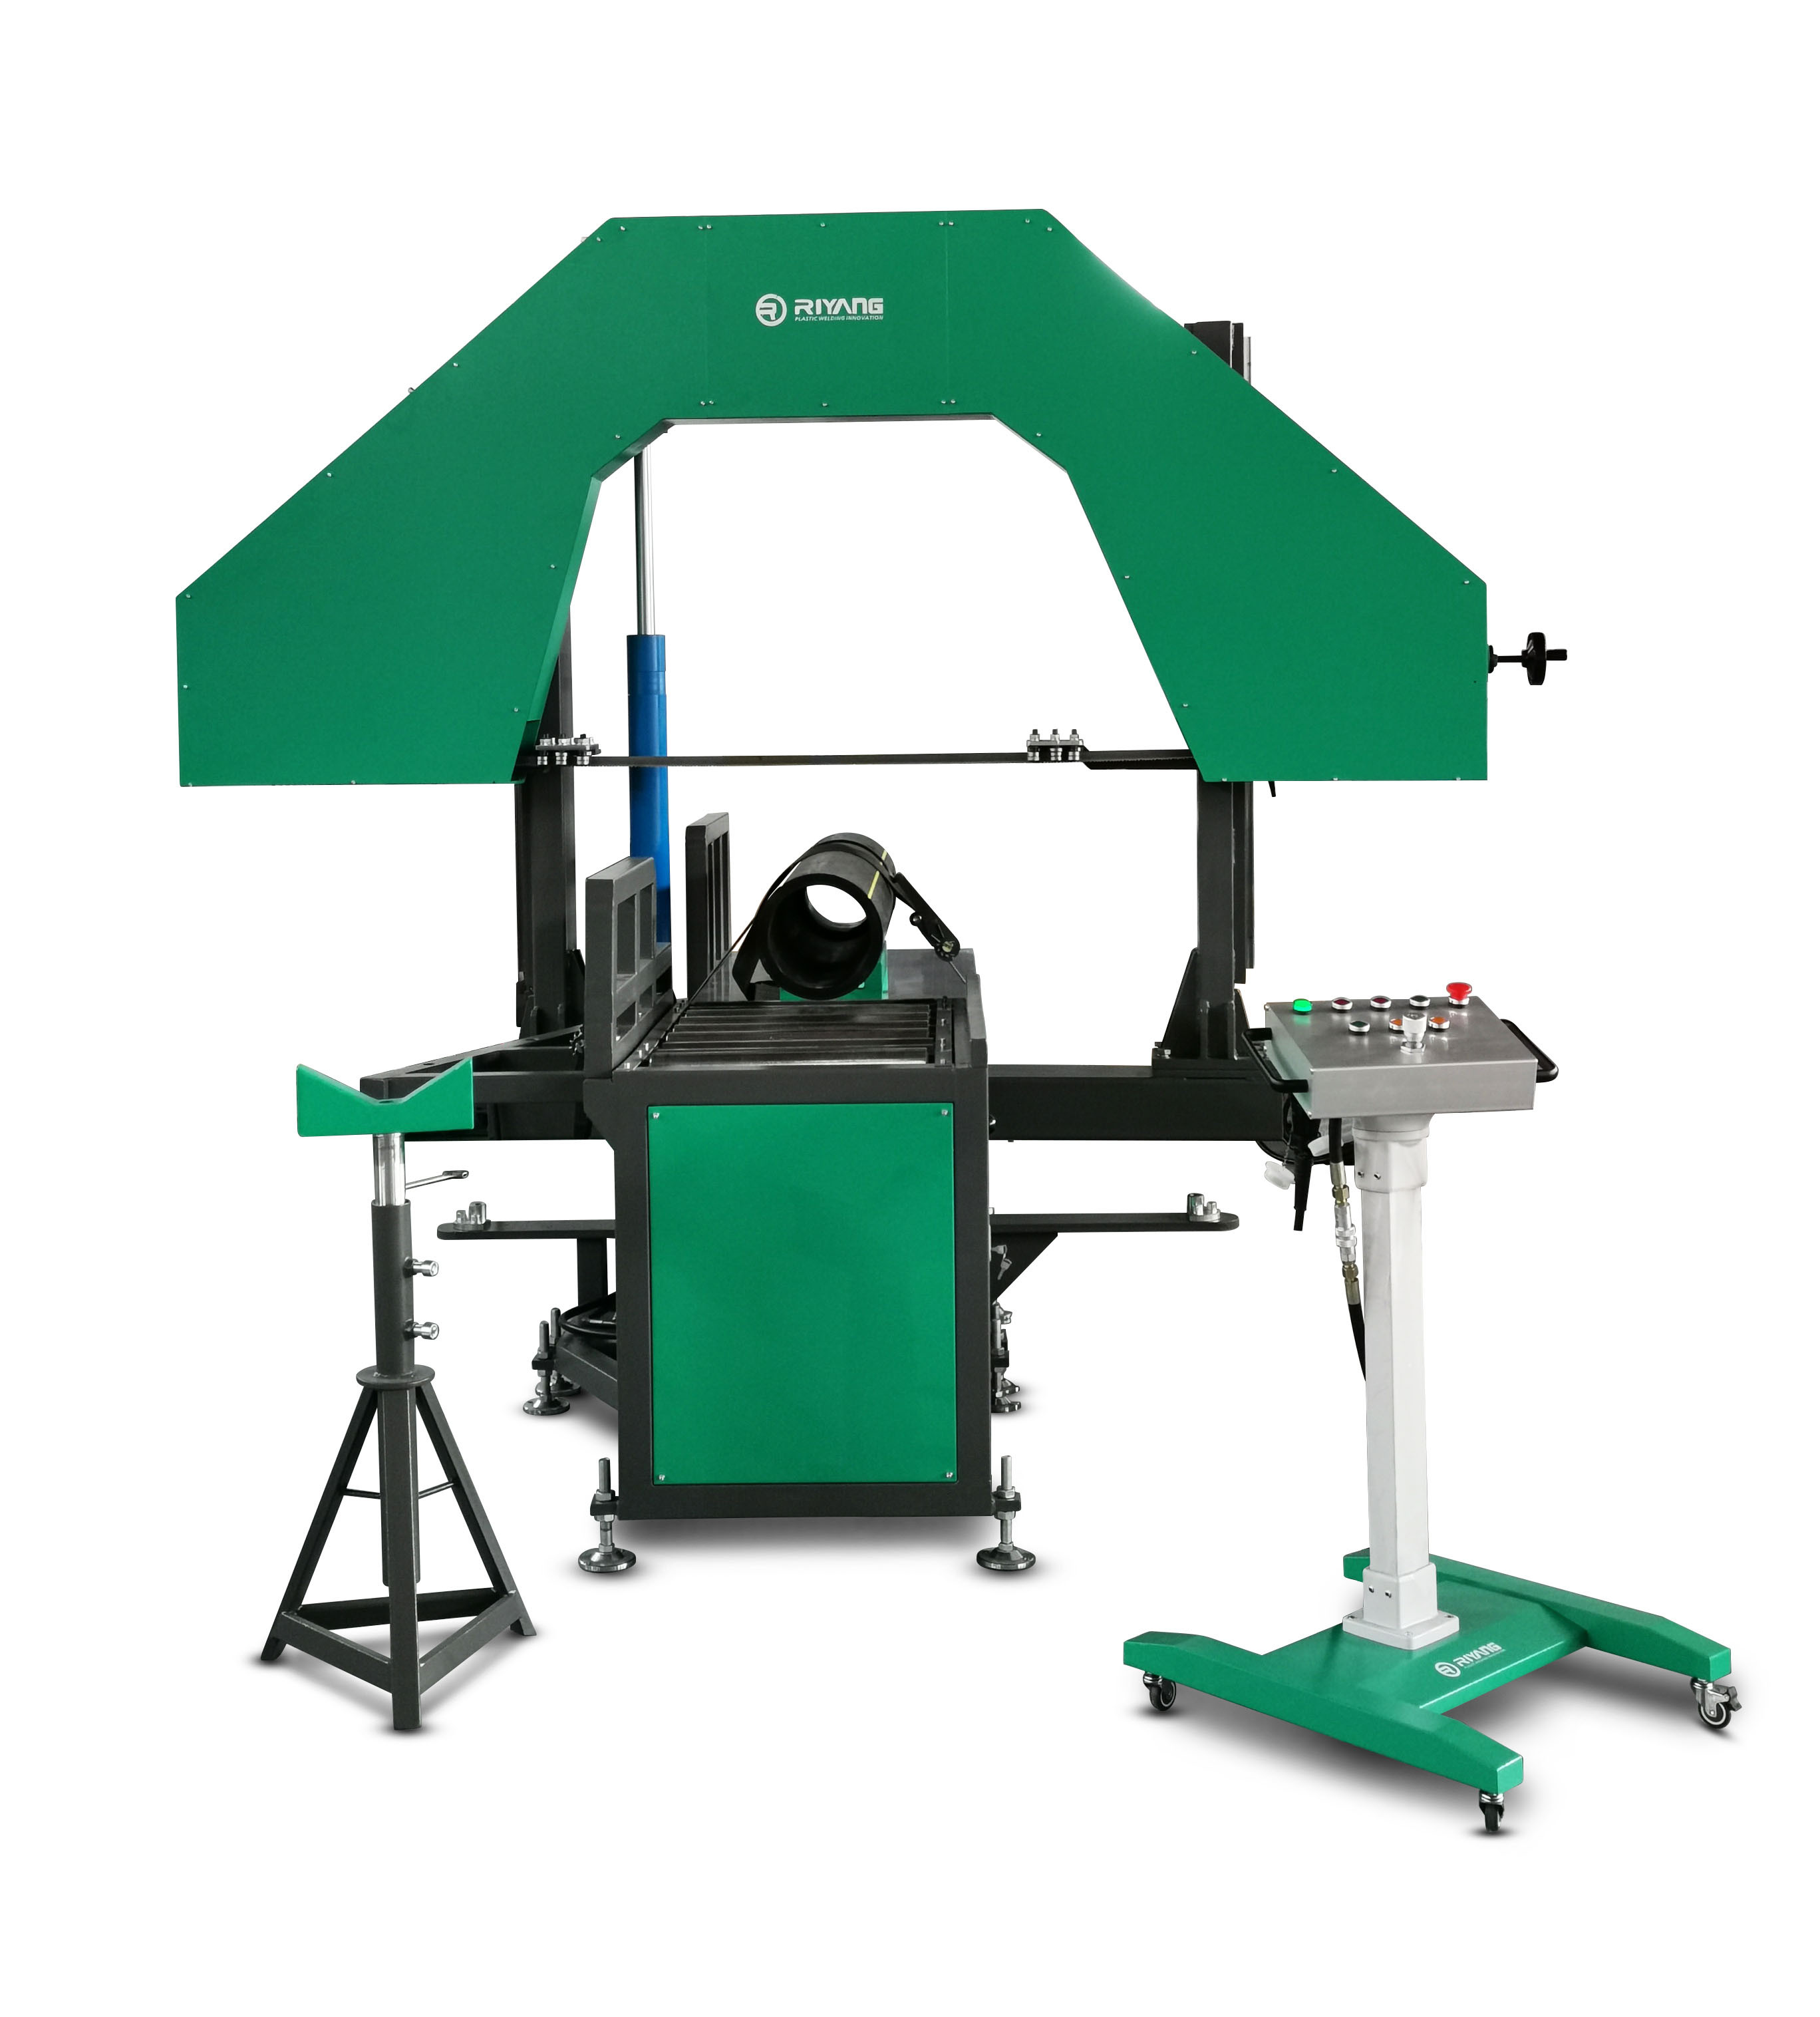 What Are the Application Areas and Key Points of Manual Pipe Cutting Machine?